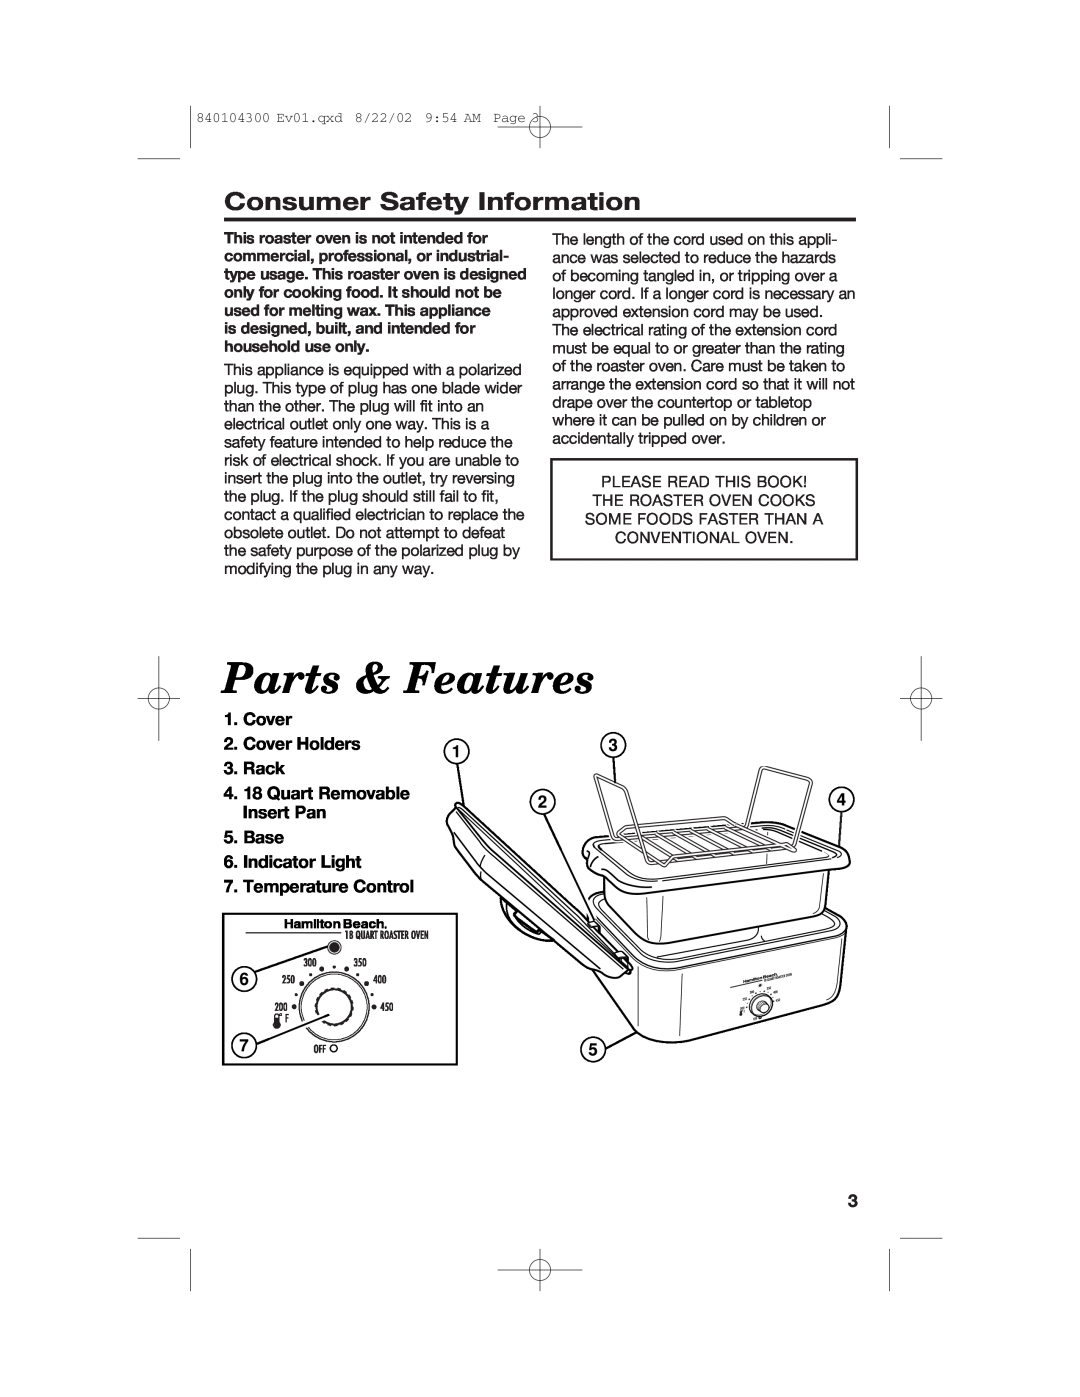 Hamilton Beach 32180C manual Parts & Features, Consumer Safety Information, Cover 2. Cover Holders 3. Rack 